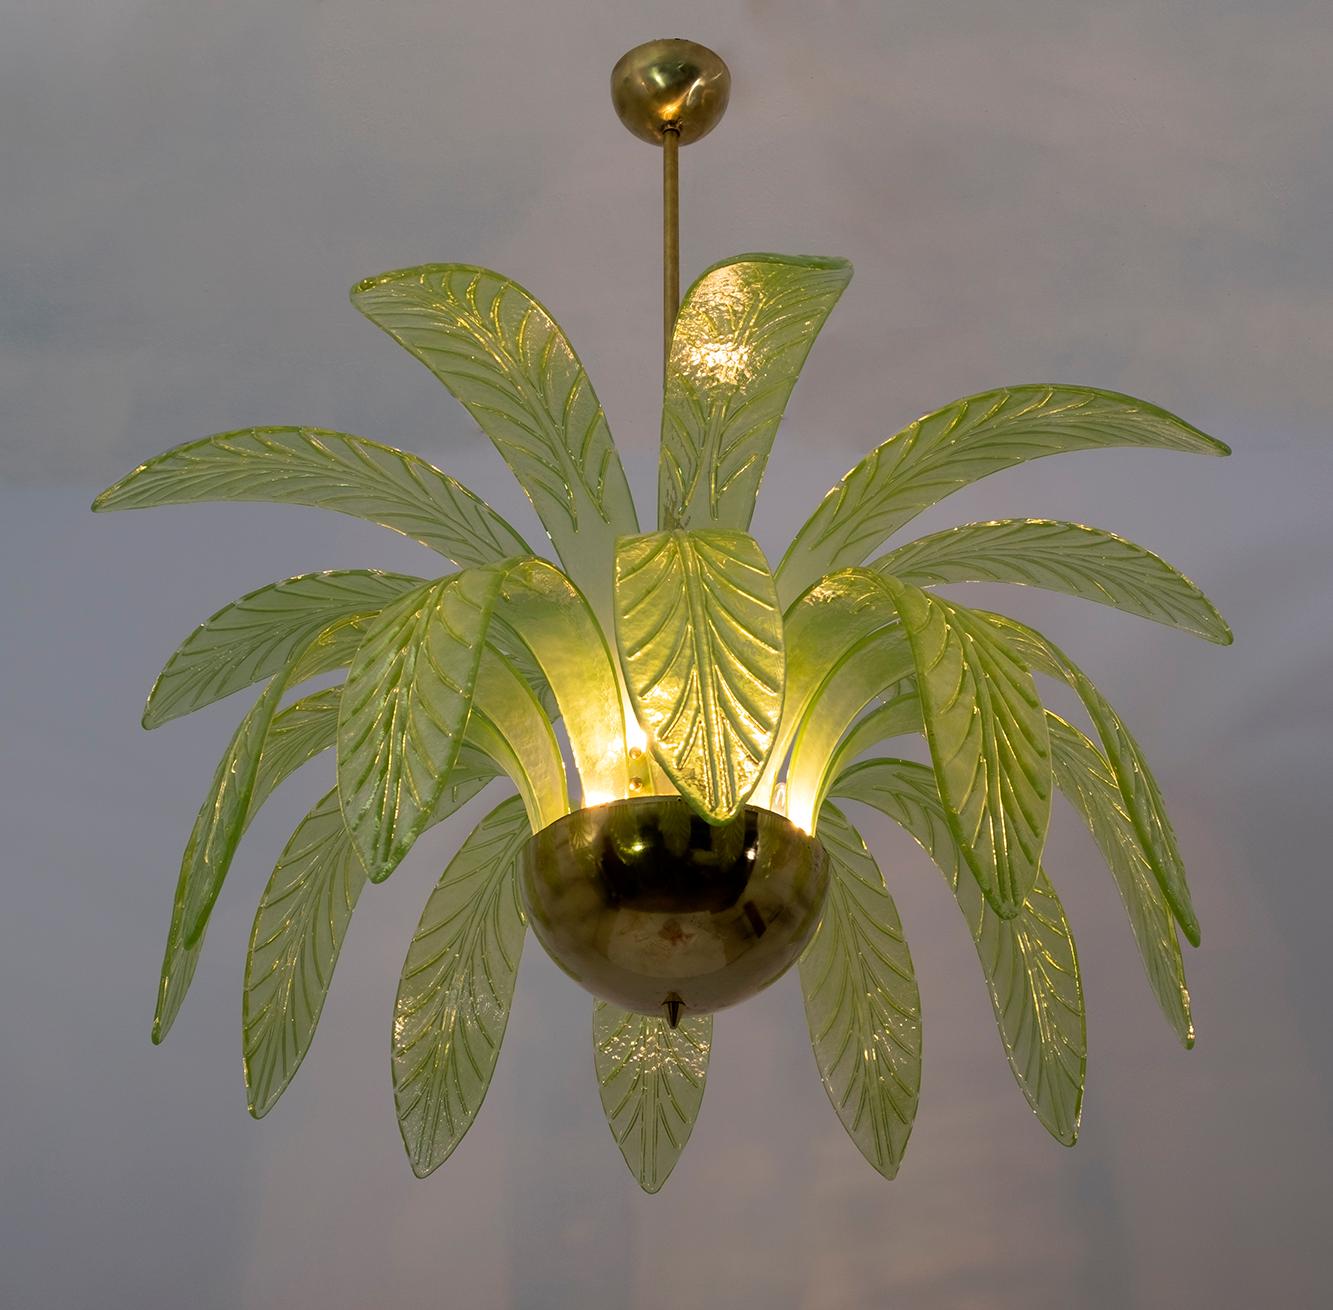 Mouth blown Murano glass chandelier, 21 green Murano glass leaves, brass structure, five bulbs.
The chandelier reproduces the crown of a palm tree.
We supply reducers for USA E12 bulbs

